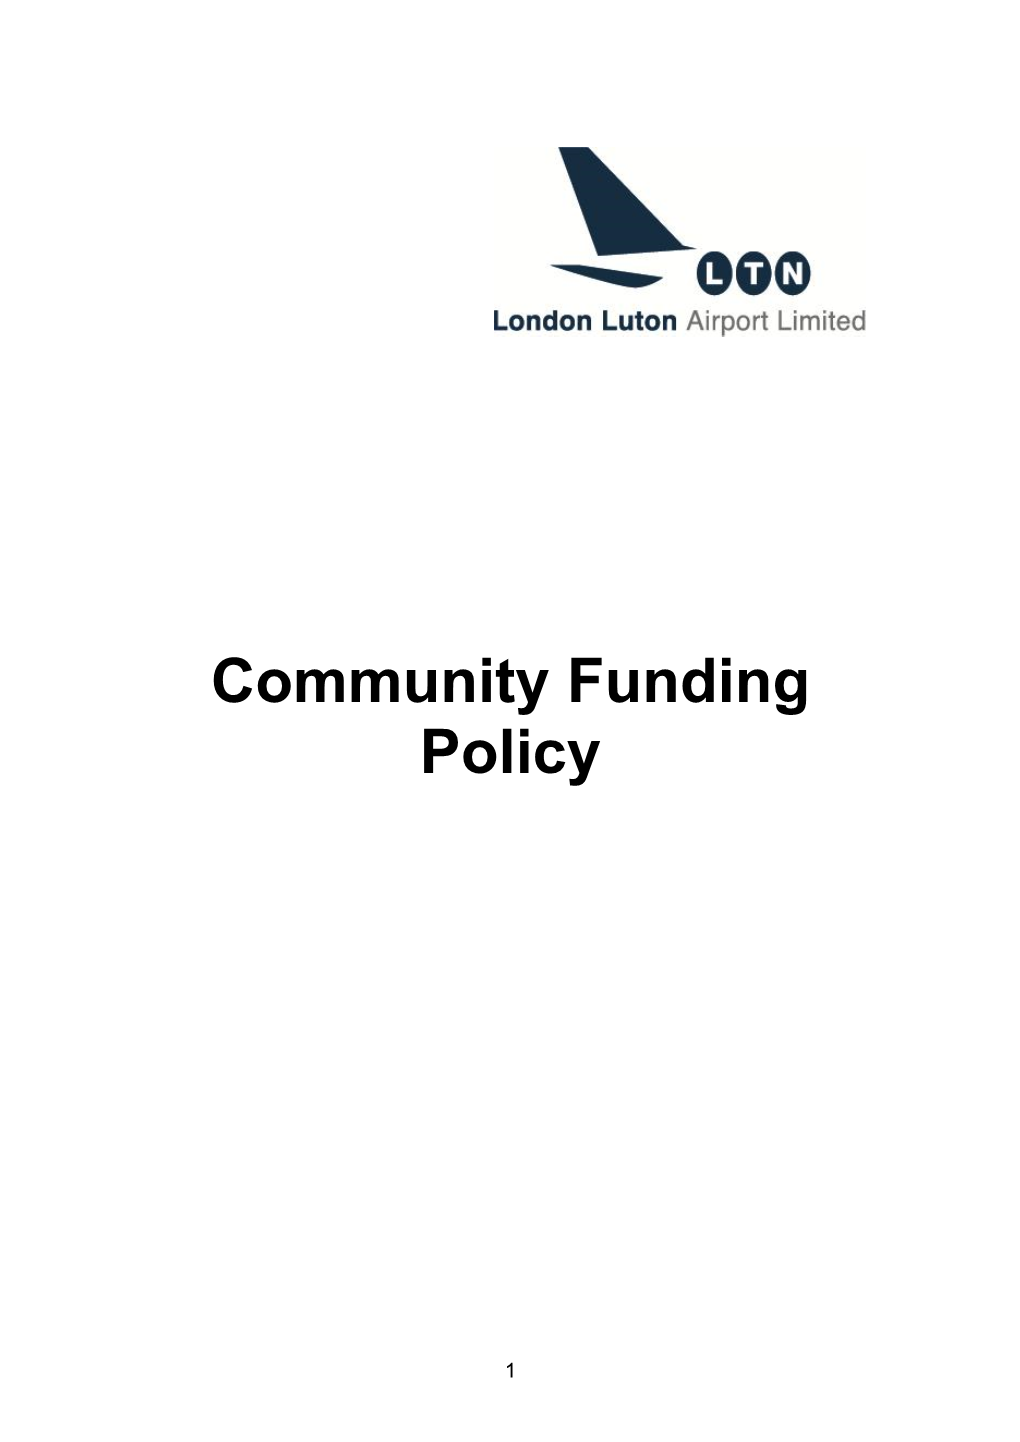 Community Funding Policy